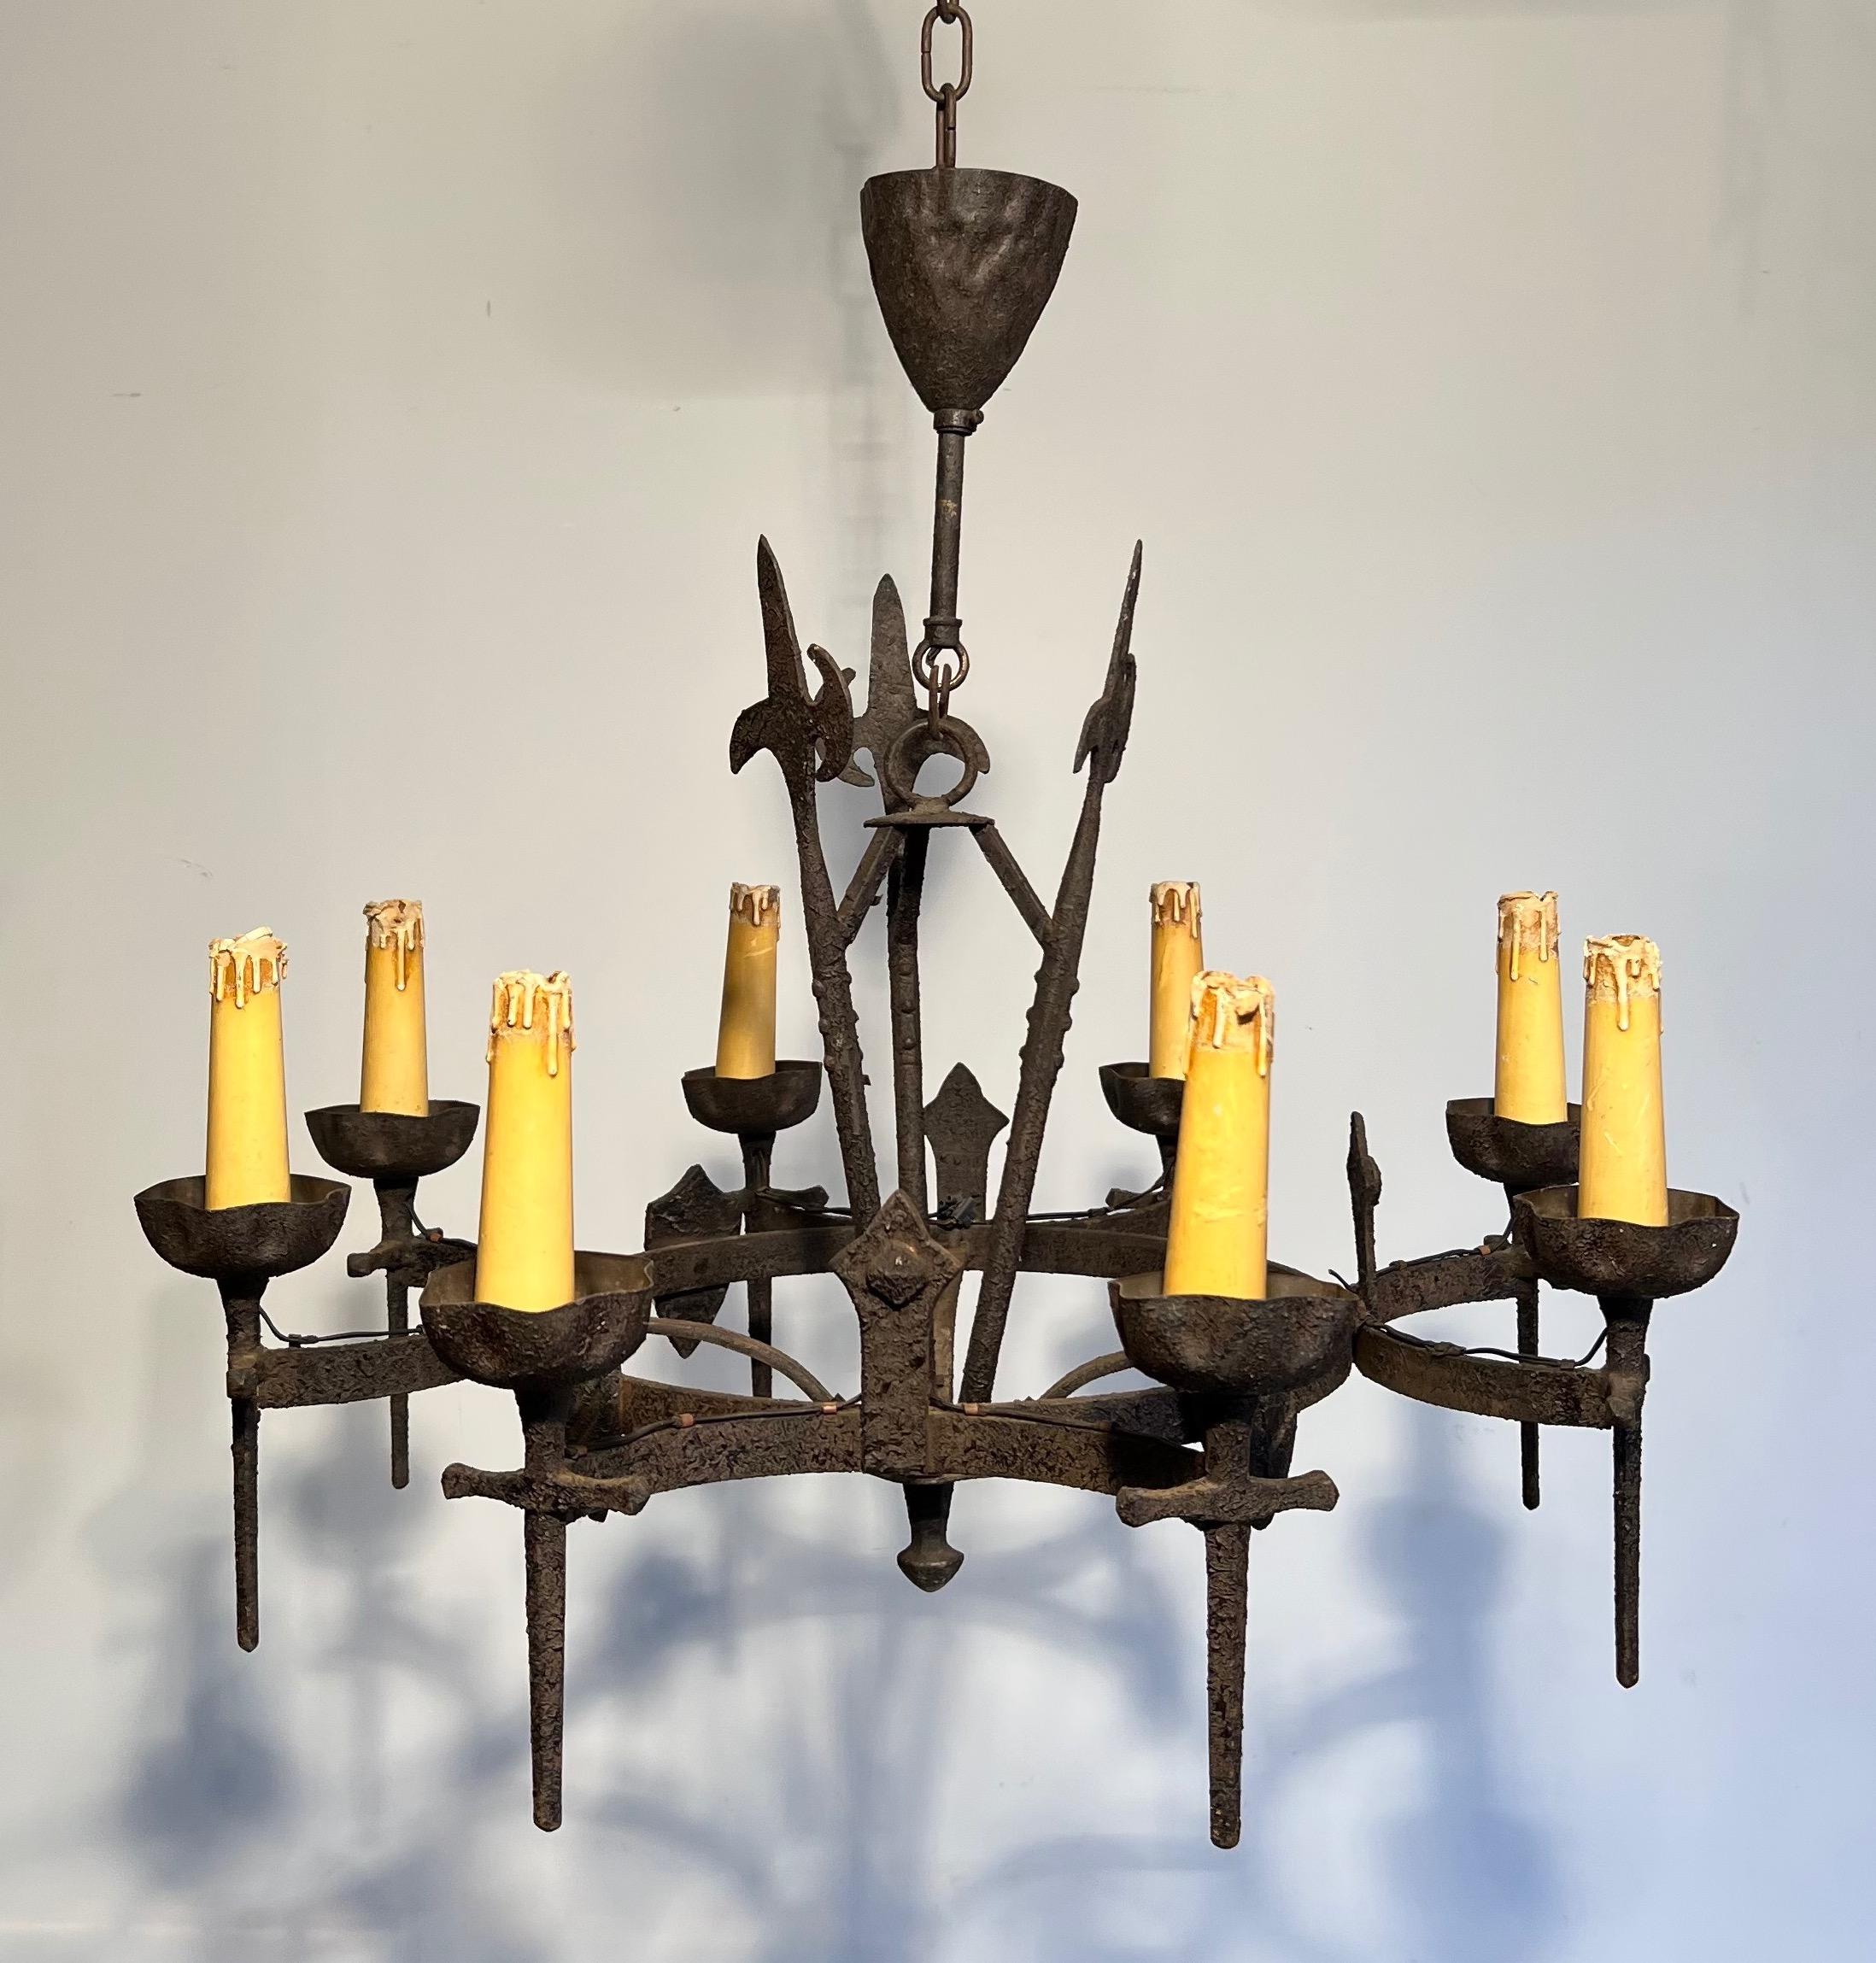 Mid-20th Century Rare Set of Three Wrought Iron Chandelier in the Gothic Style. Circa 1950 For Sale